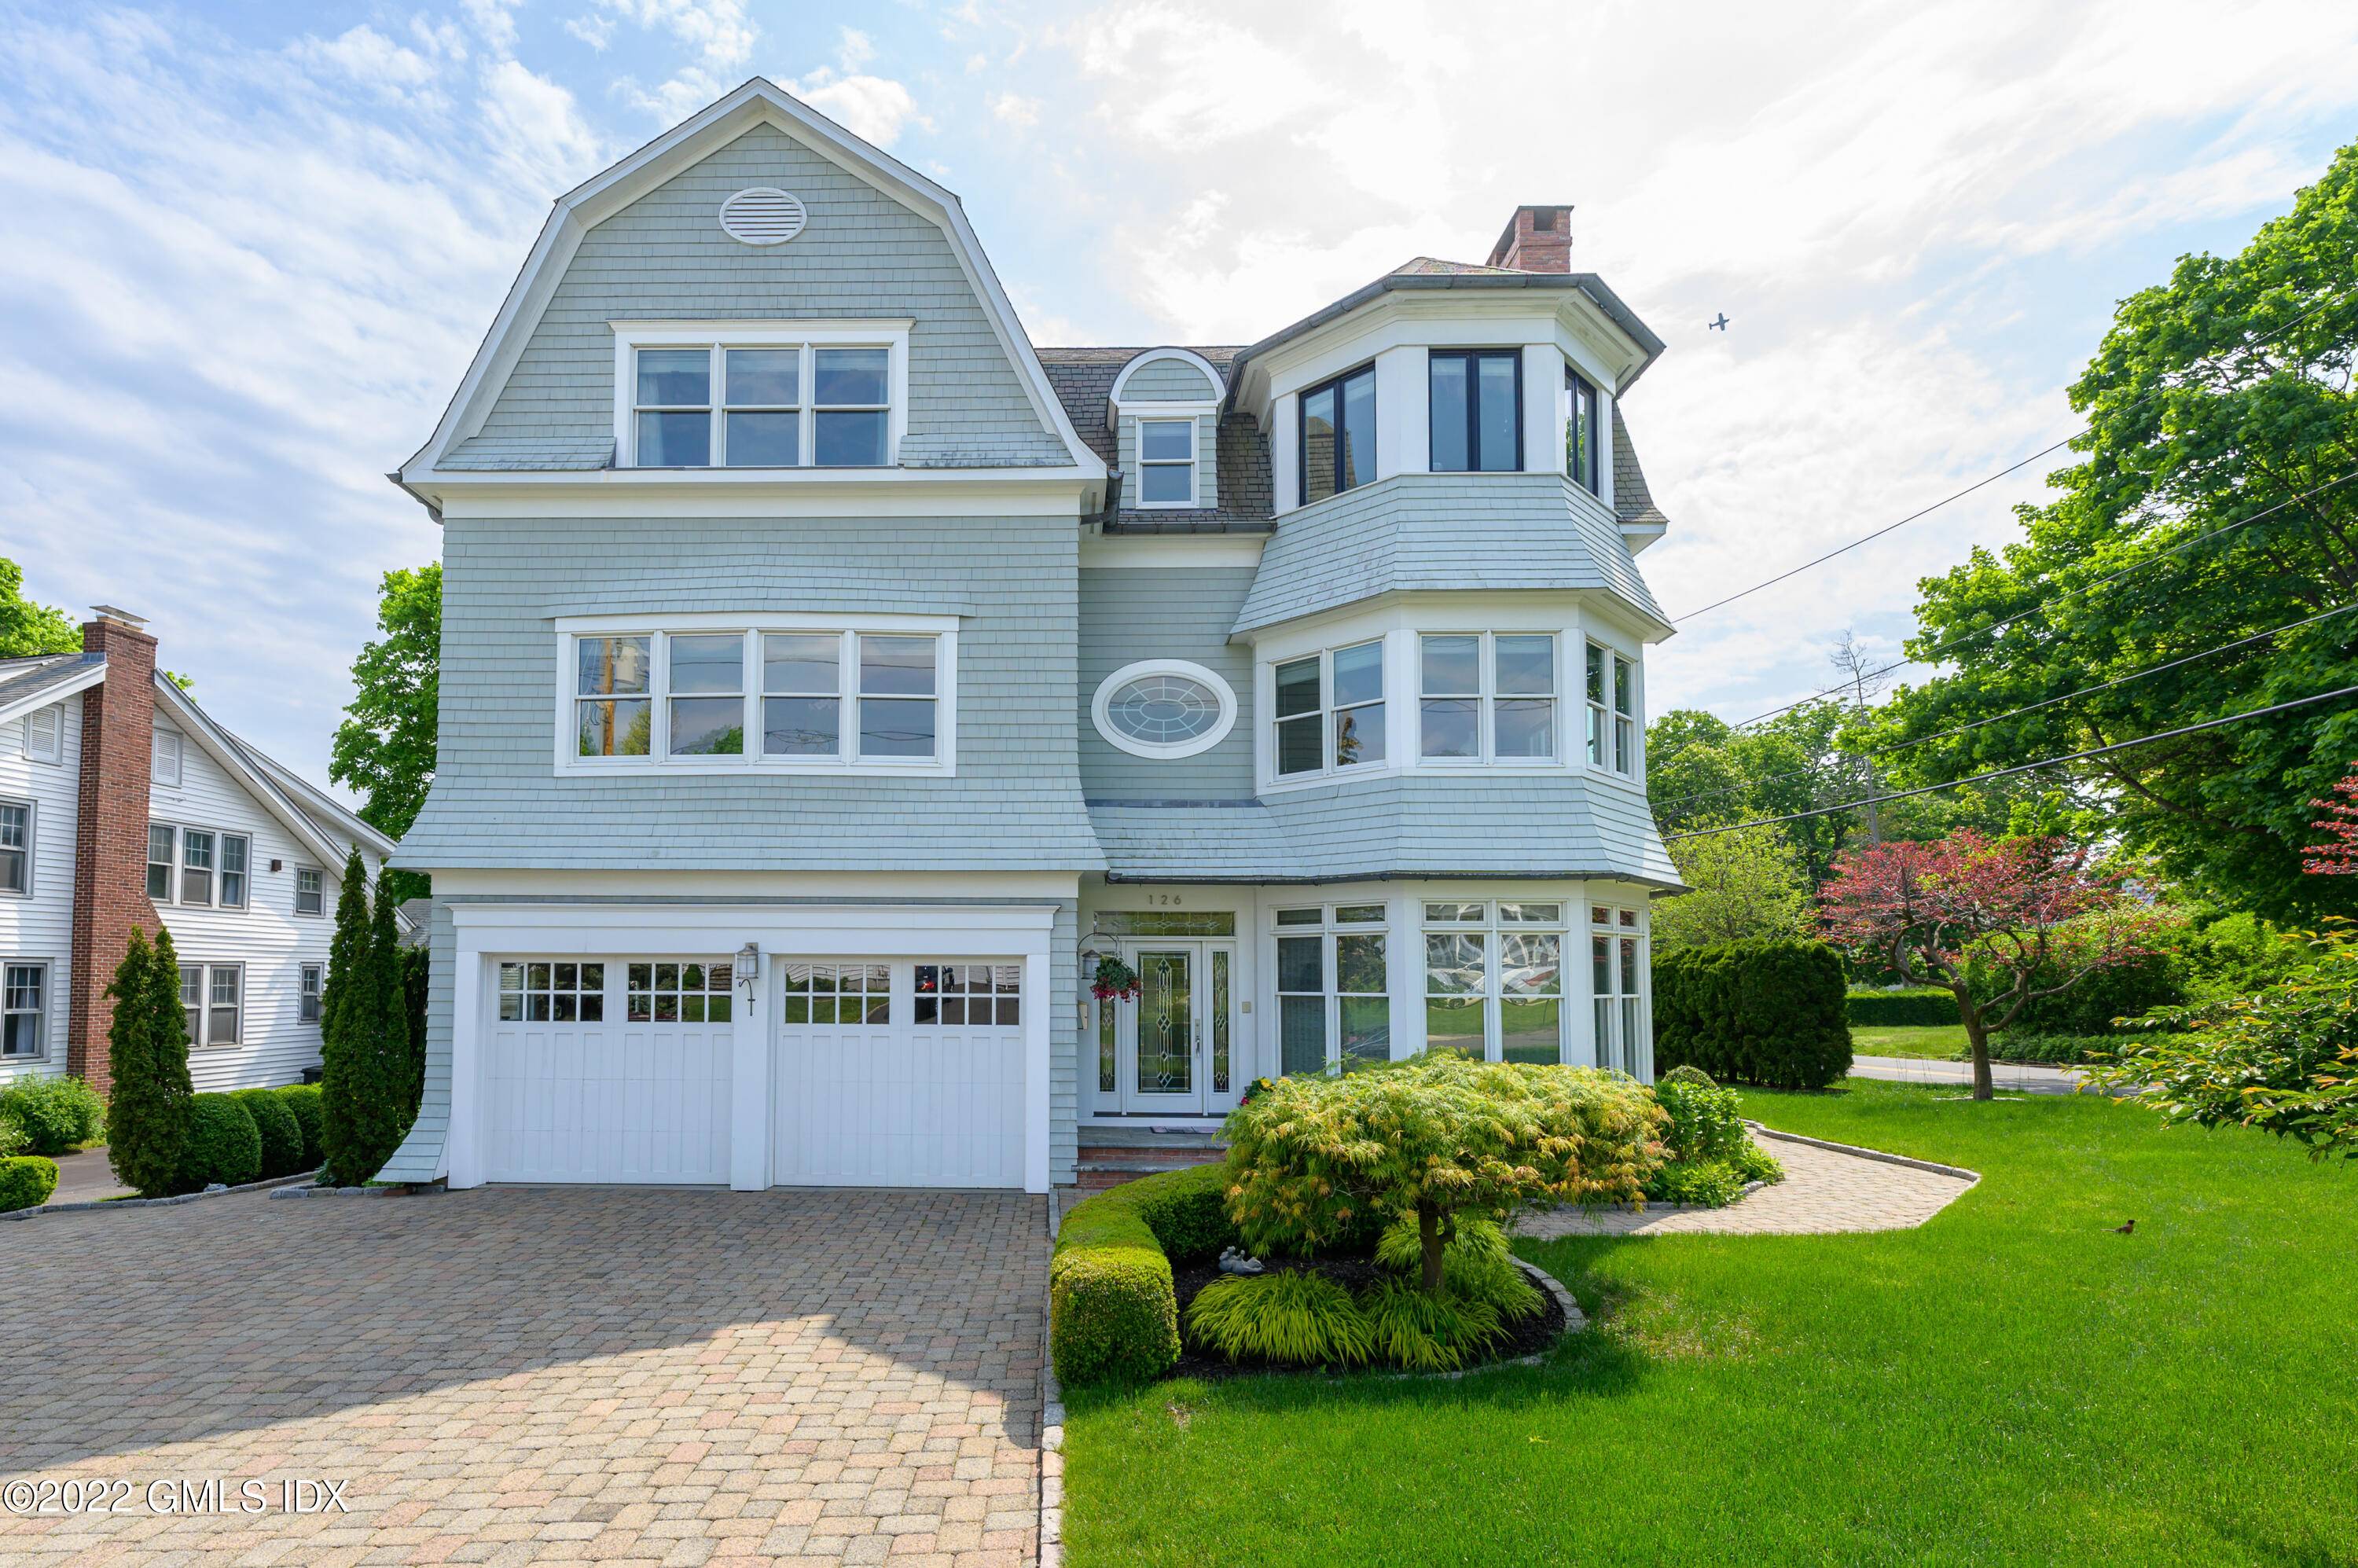 Welcome to life in desirable Laurel Beach where residents enjoy private access to Long Island Sound, stretches of pristine white sands, a boardwalk, tennis courts club house too.